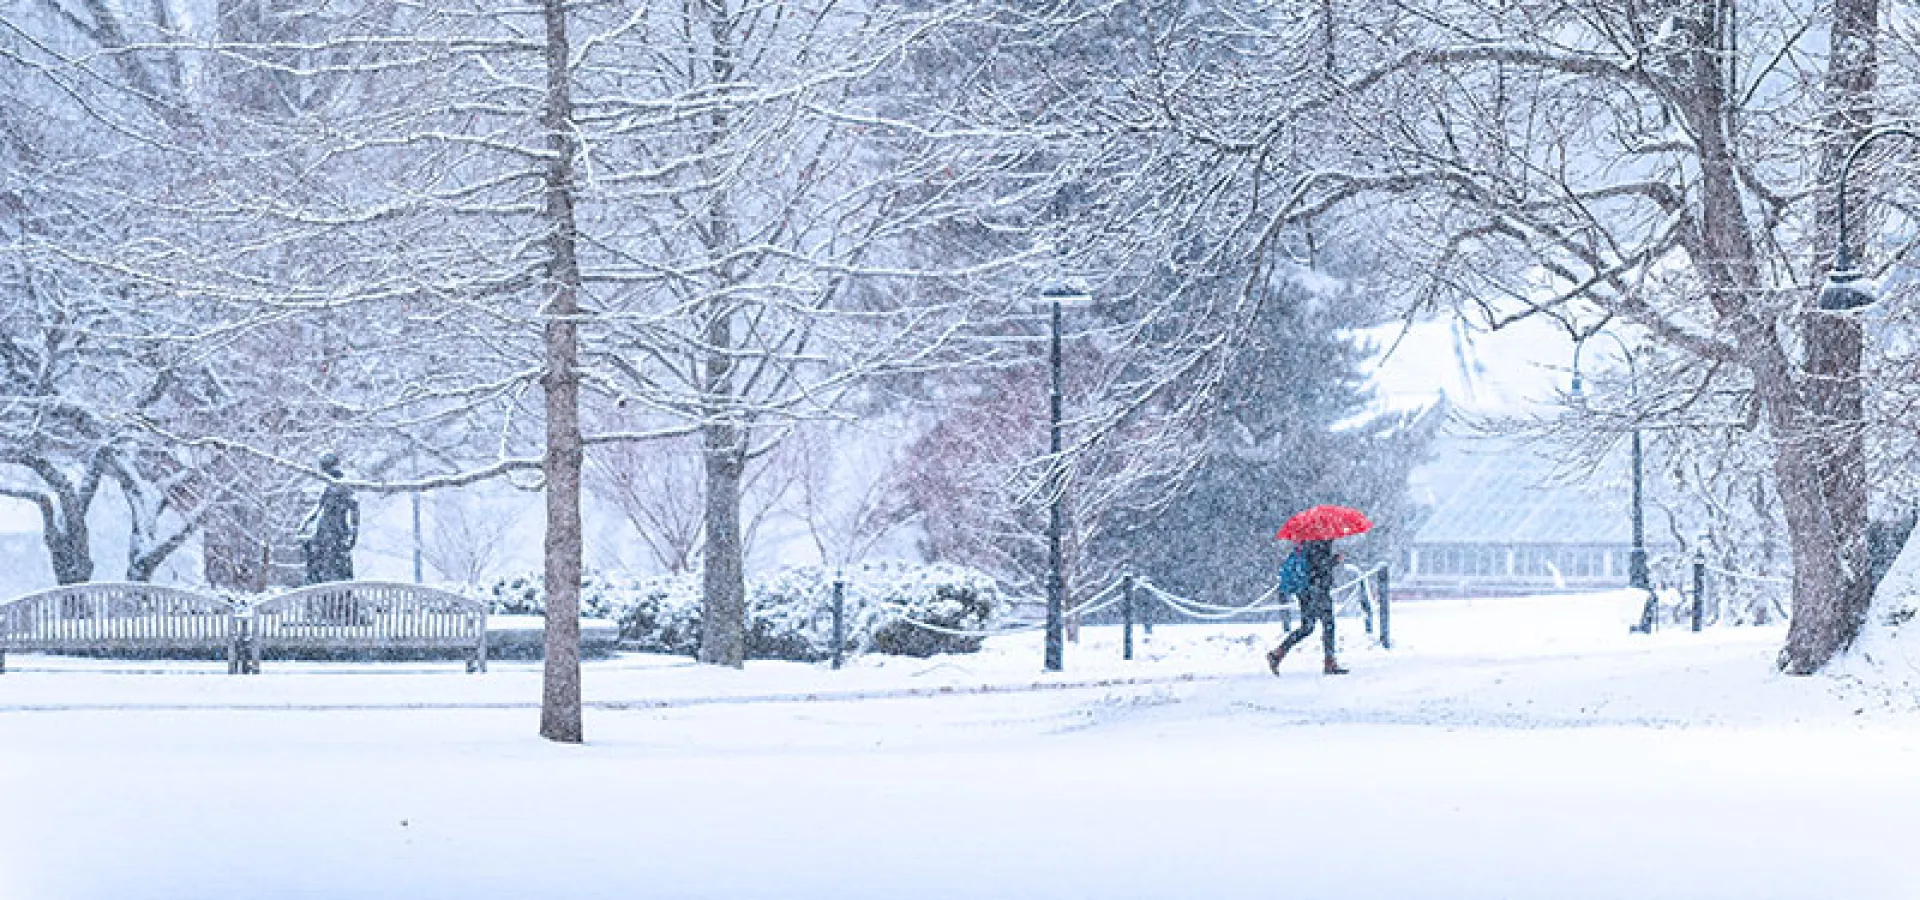 A single student with a red umbrella walking in a snowstorm